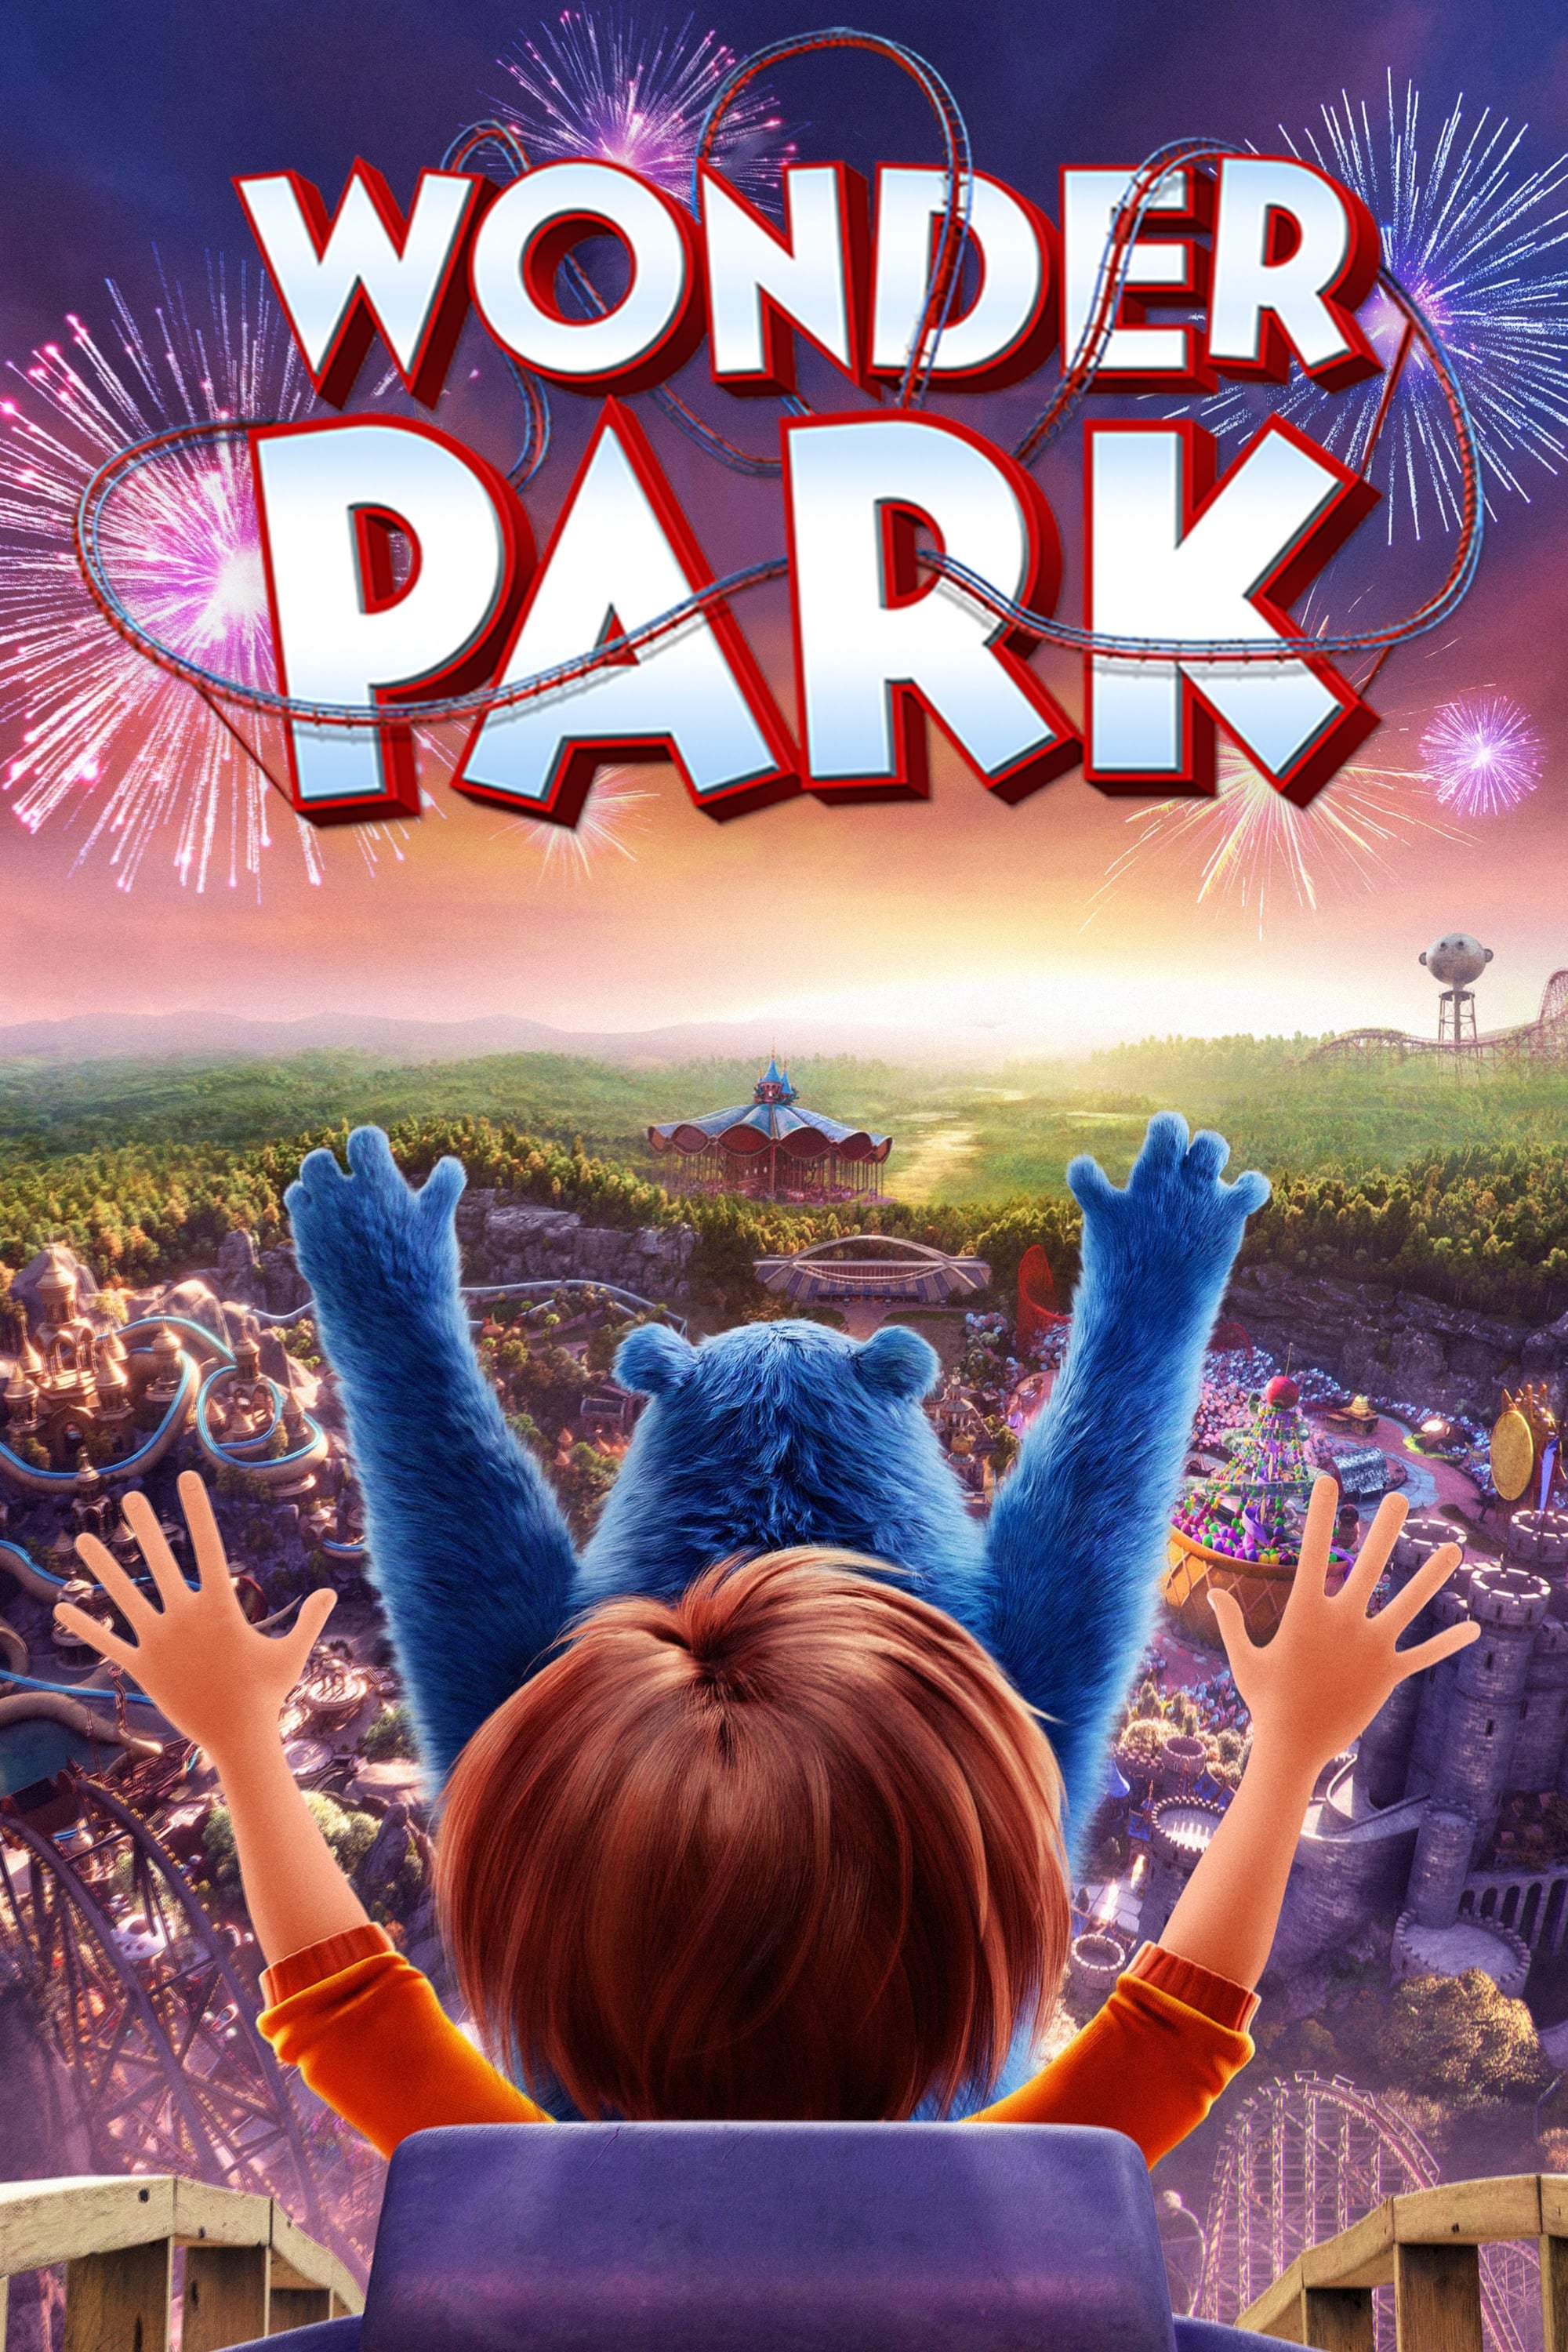 graphic: wonder park movie promo, girl and blue bear riding on a rollercoaster